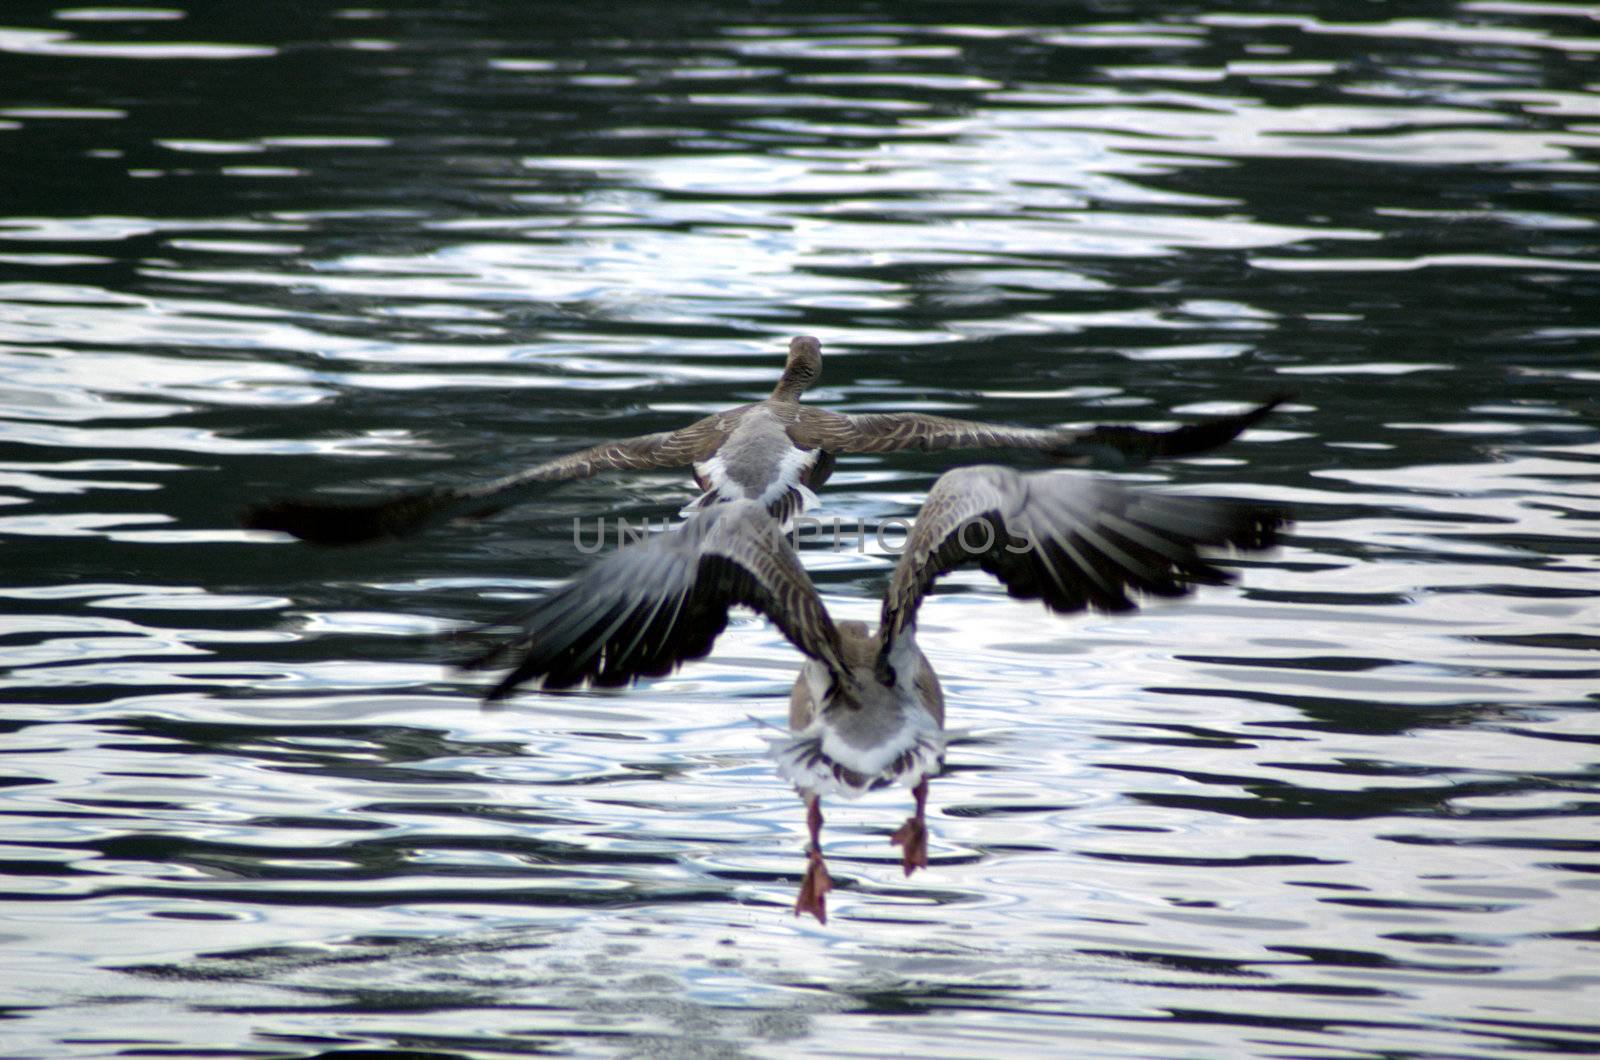 Two geese taking off from the water in a hurry